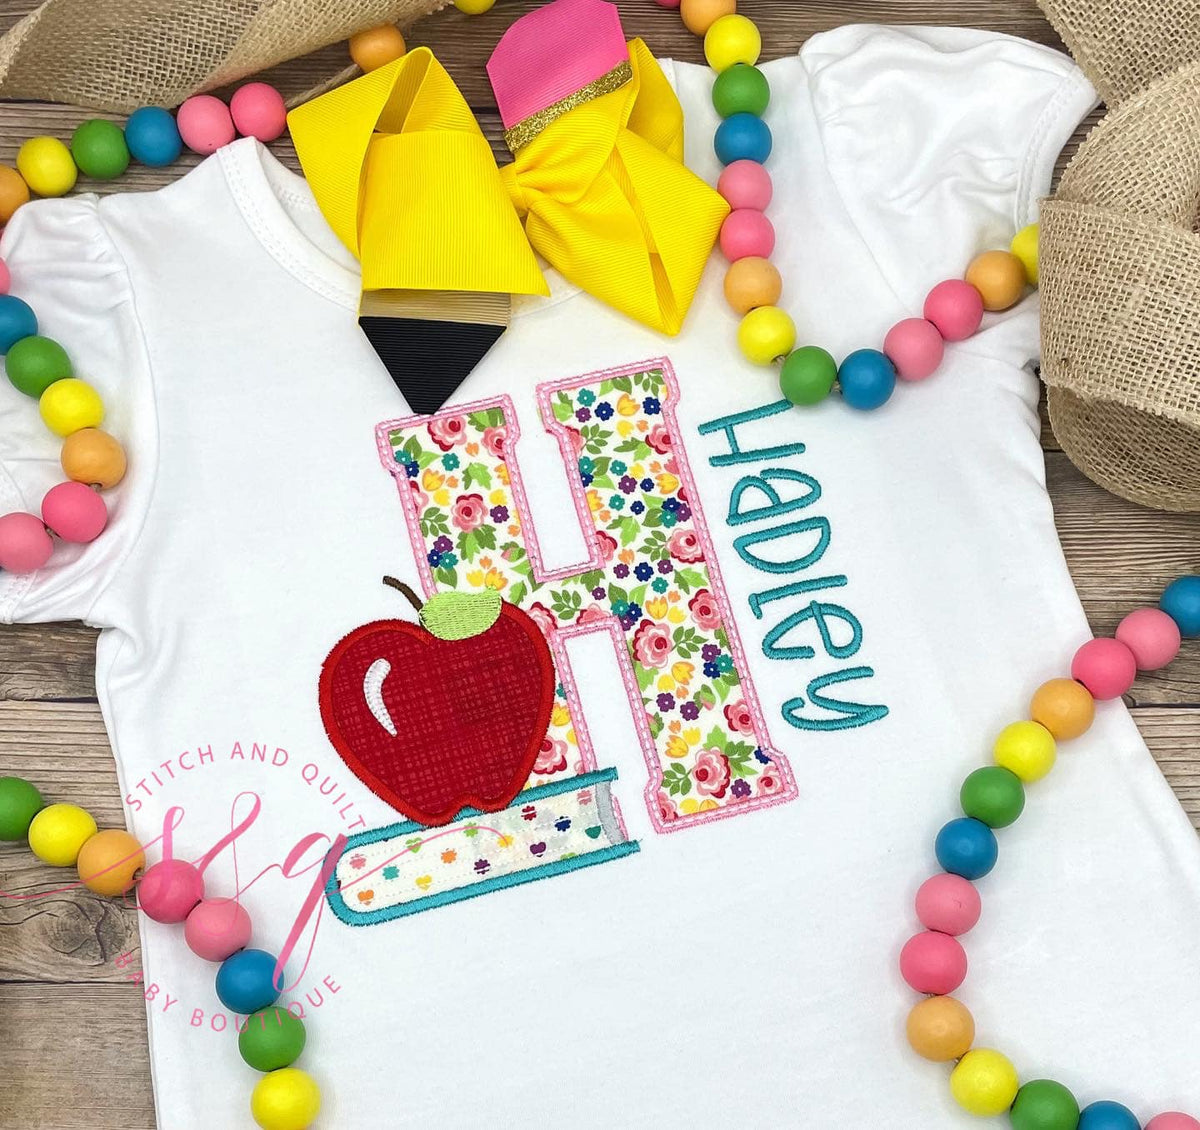 Girls back to school outfit, Letter shirt for school with apple and book